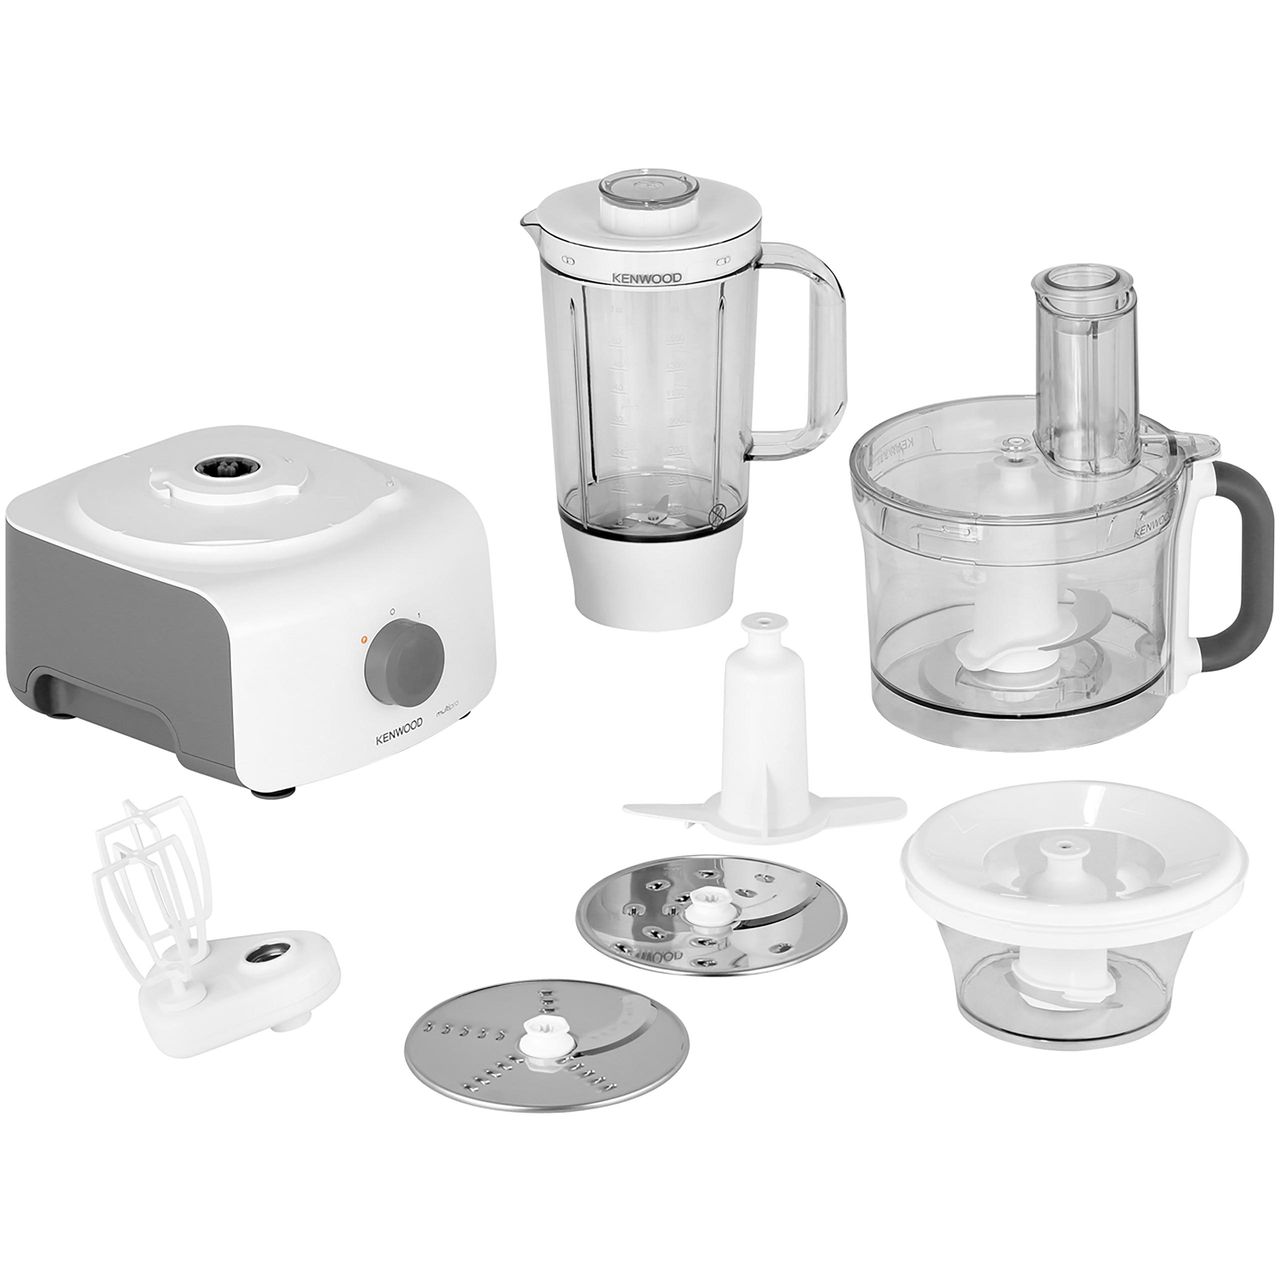 Kenwood MultiPro FDP643WH 3 Litre Food Processor Review